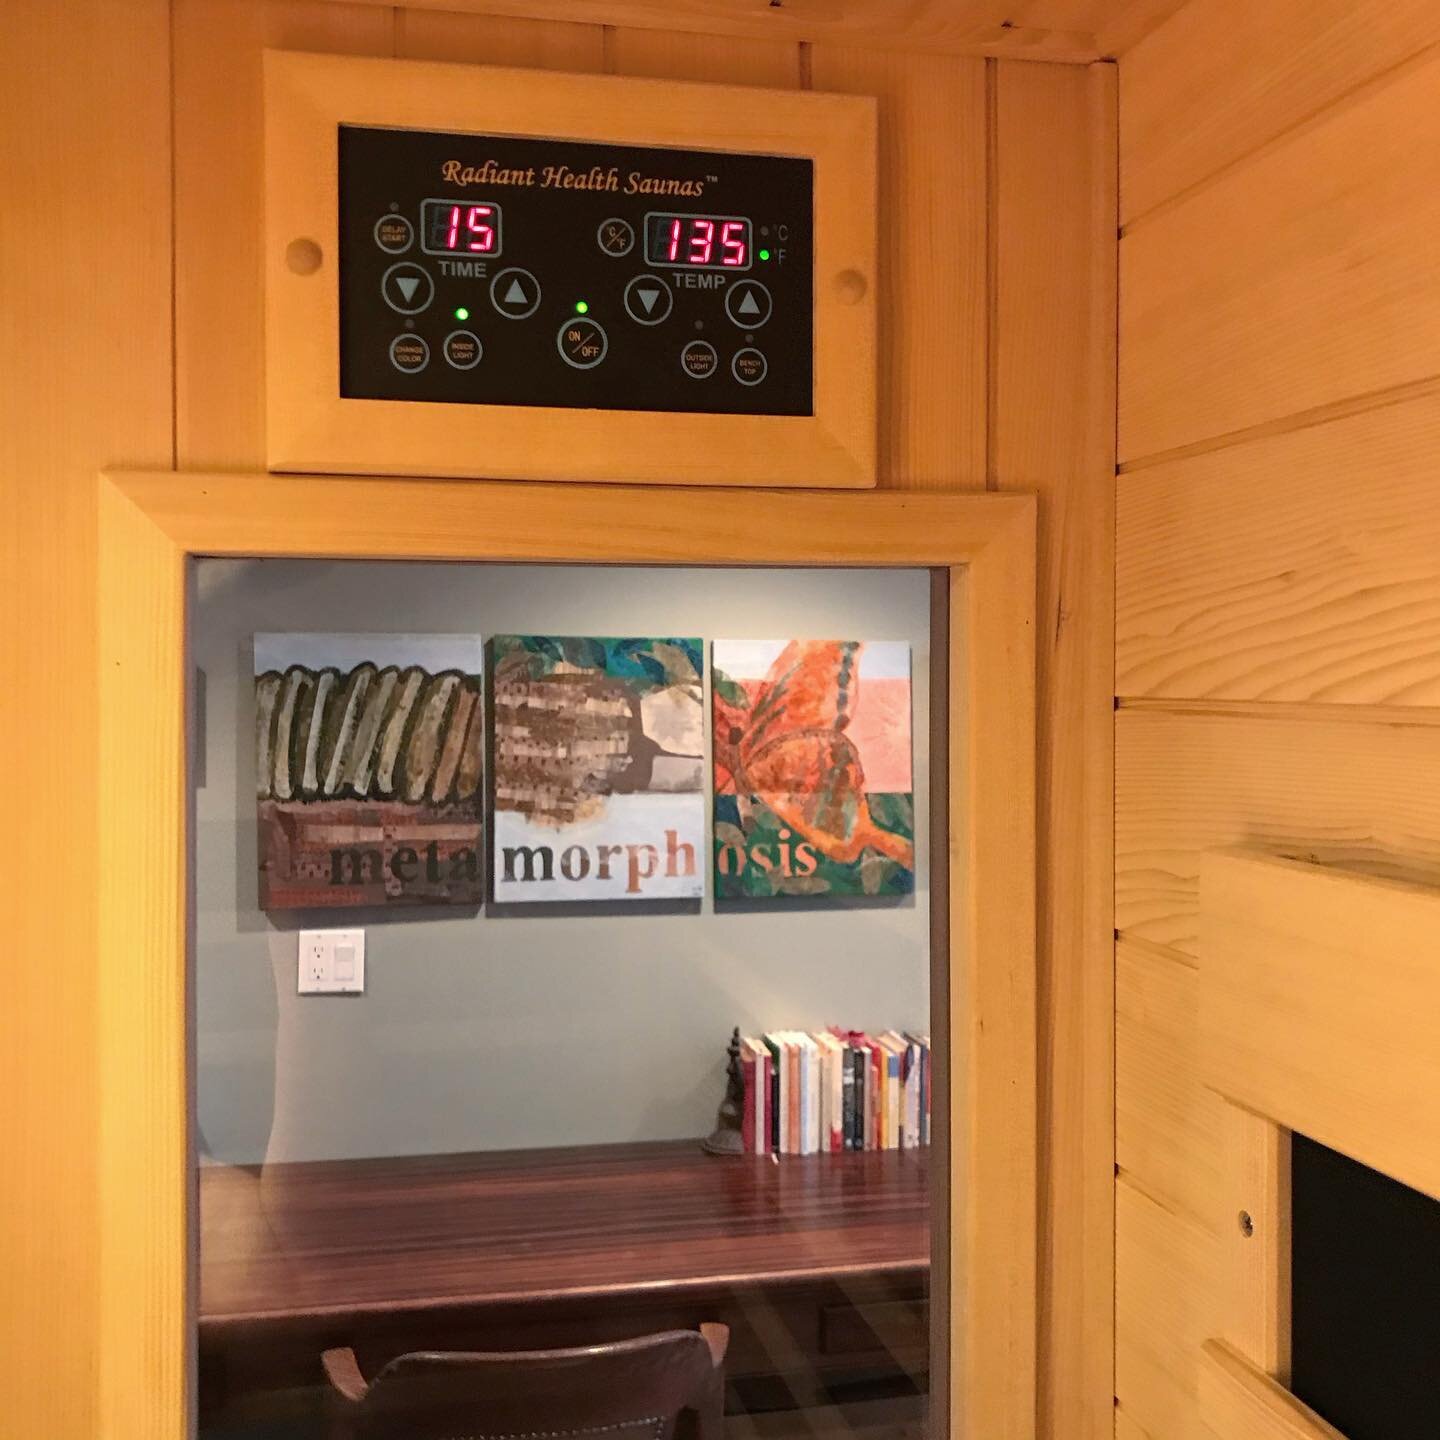 My happy place - particularly during this last frosty week!!! I bought an infrared sauna earlier this year. I&rsquo;m making it a daily practice. Sure have appreciated the sessions of intense warmth while it&rsquo;s below freezing and all snowy here!